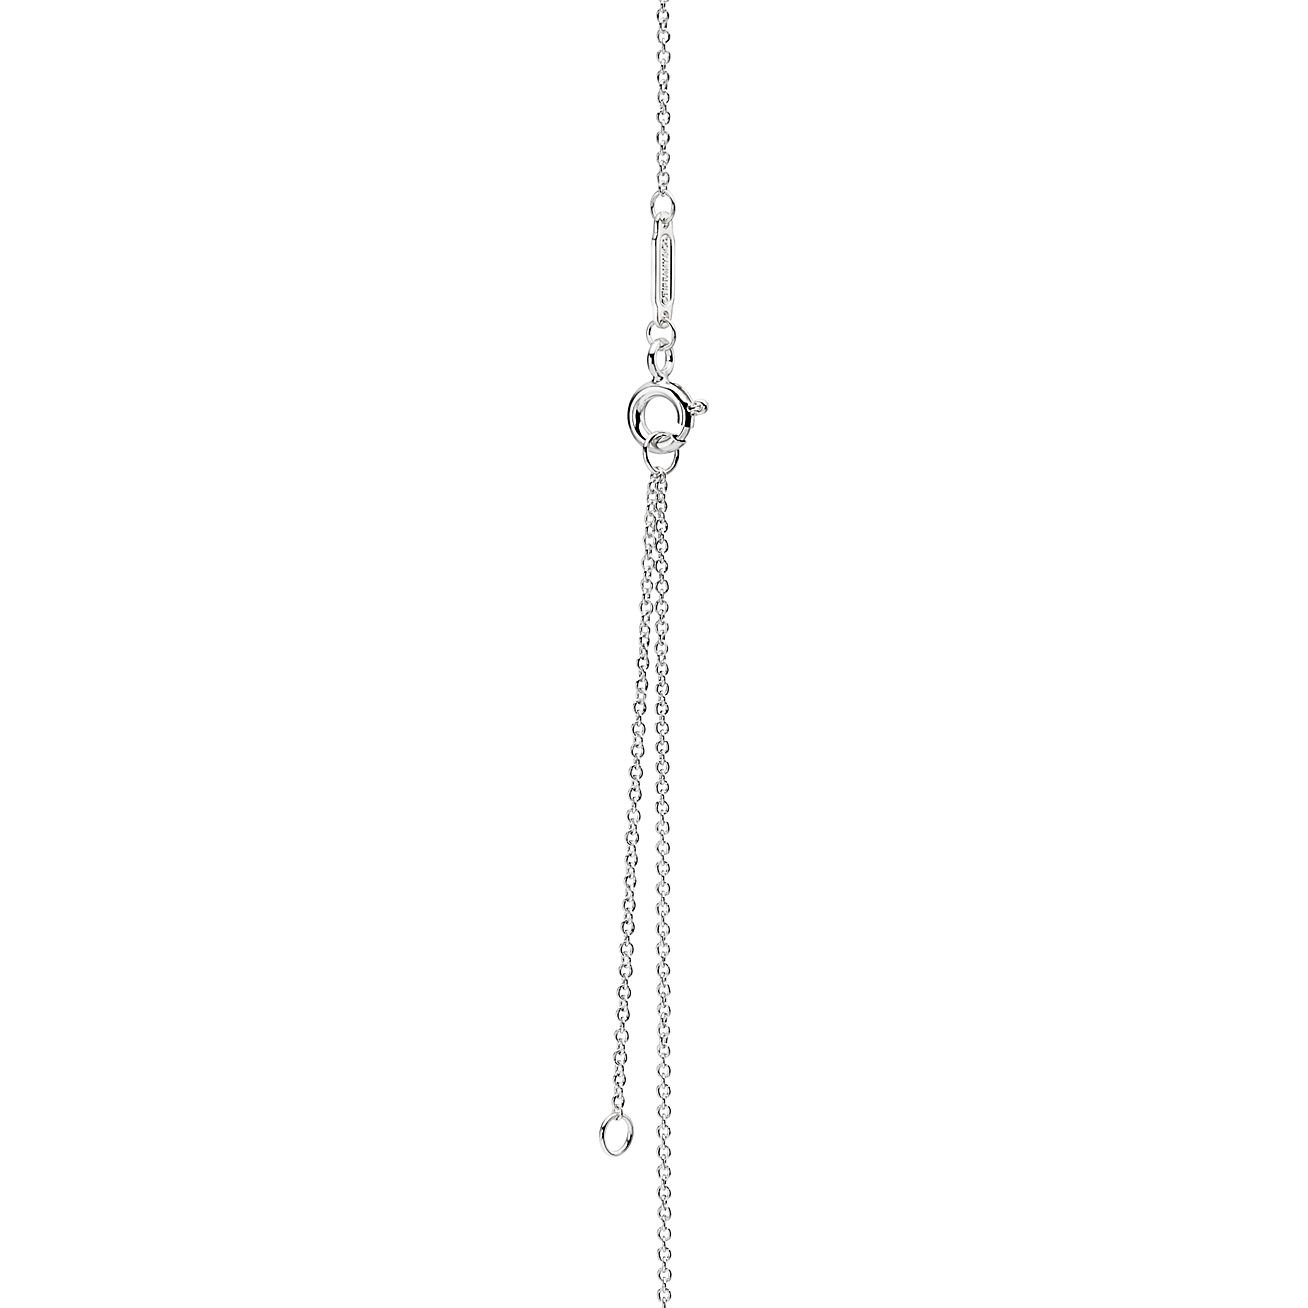 Return to Tiffany® Heart Tag and Key Necklace in Silver with a Diamond,  Medium